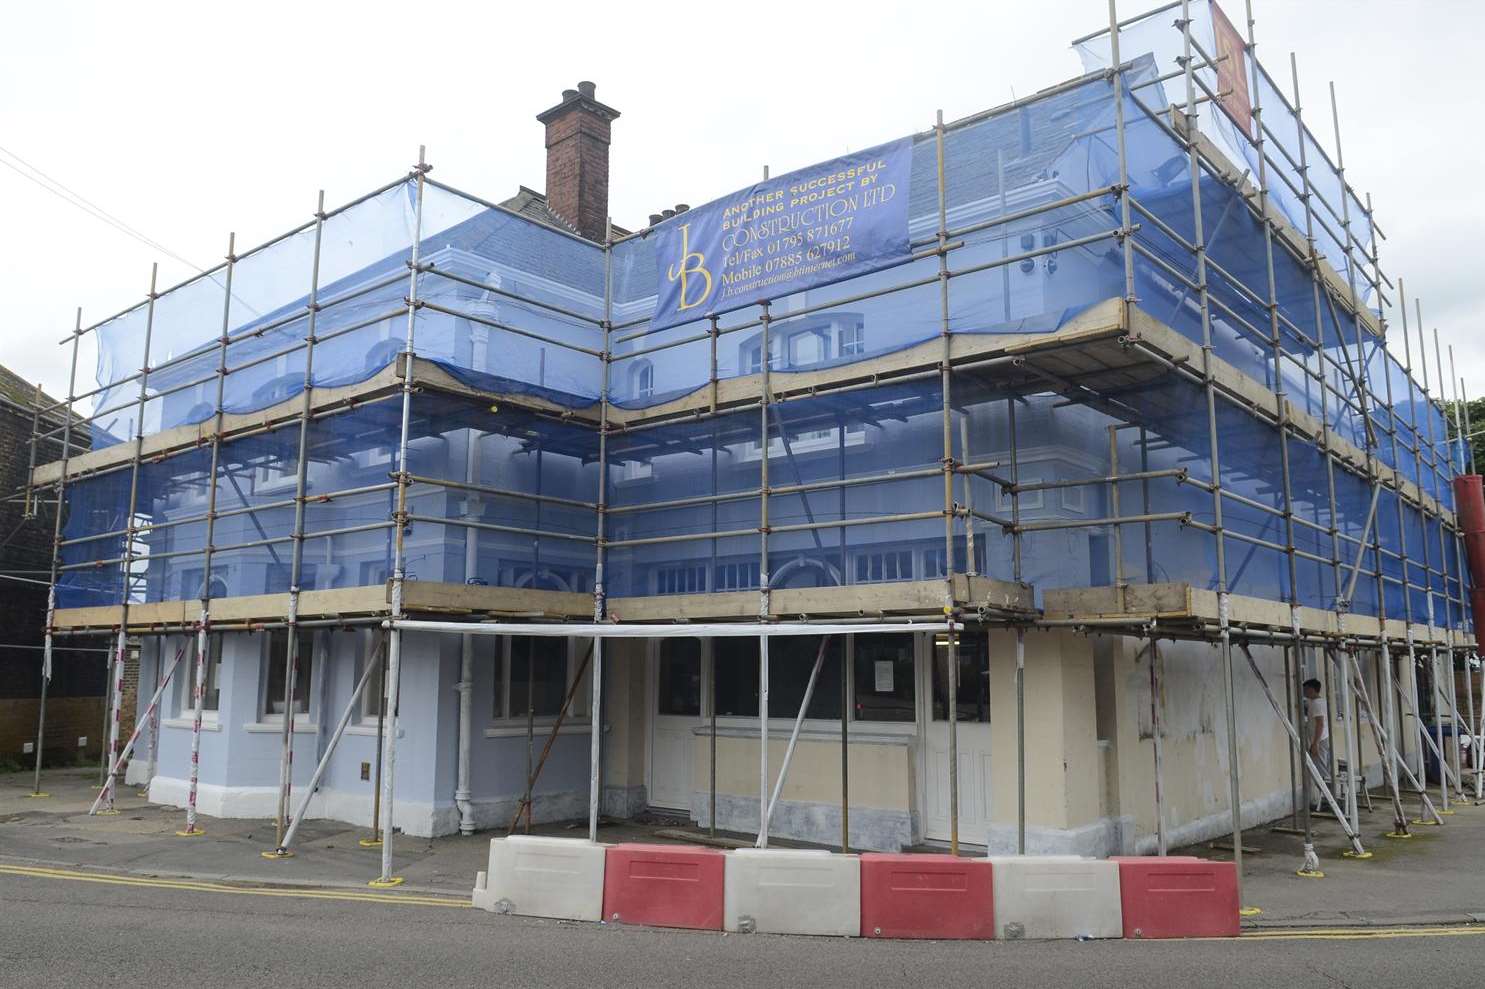 The former Queen Phillippa pub in Queenborough which is being converted to a B&B and cafe